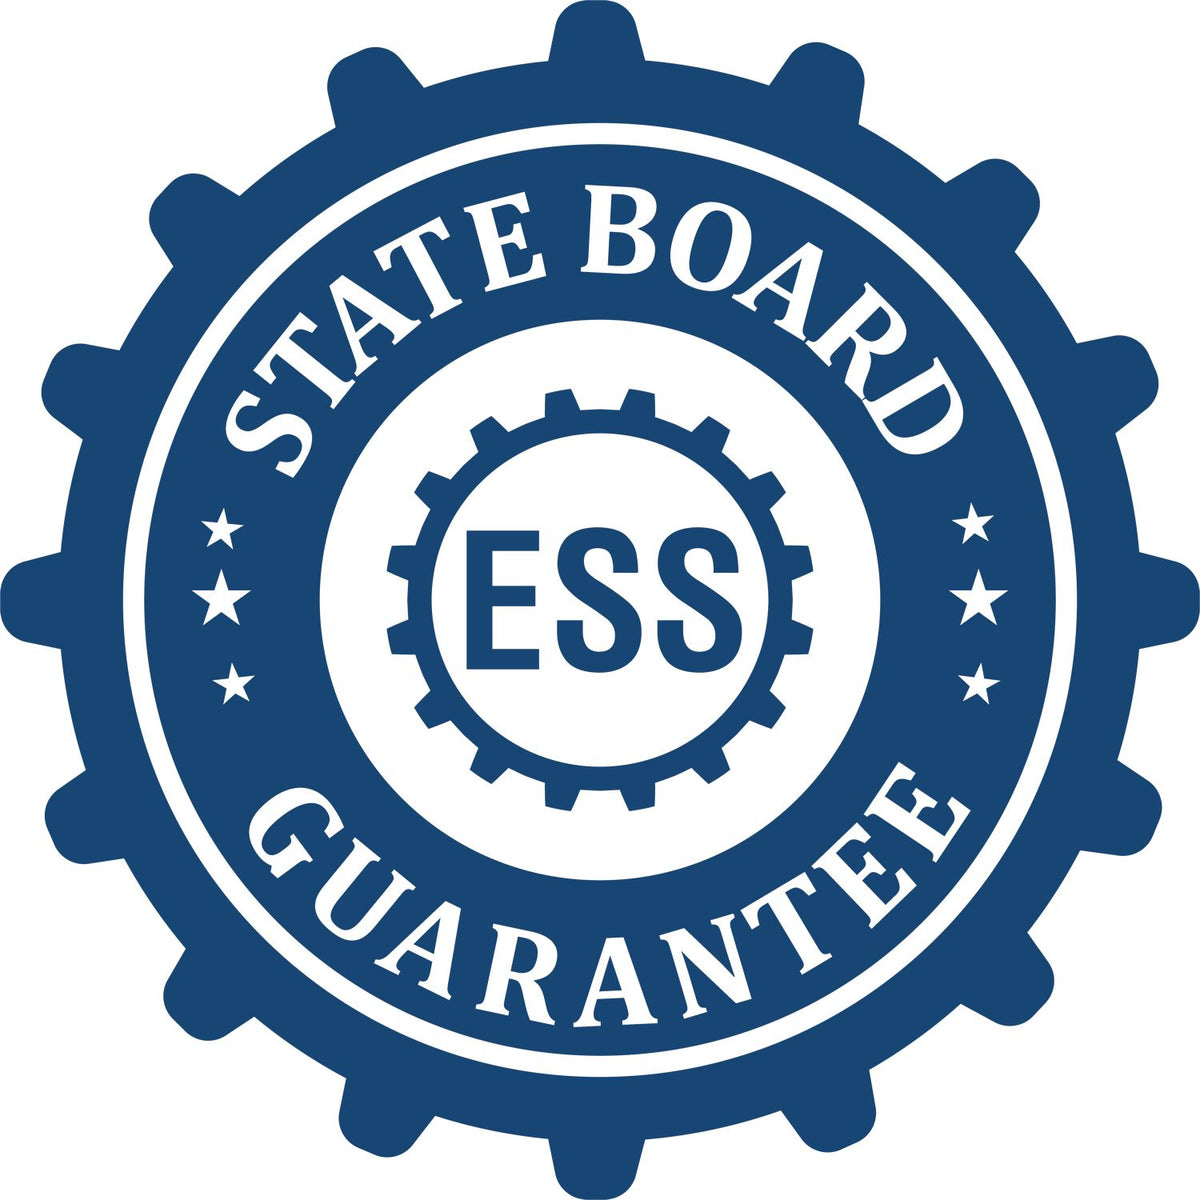 An emblem in a gear shape illustrating a state board guarantee for the Maine Desk Architect Embossing Seal product.